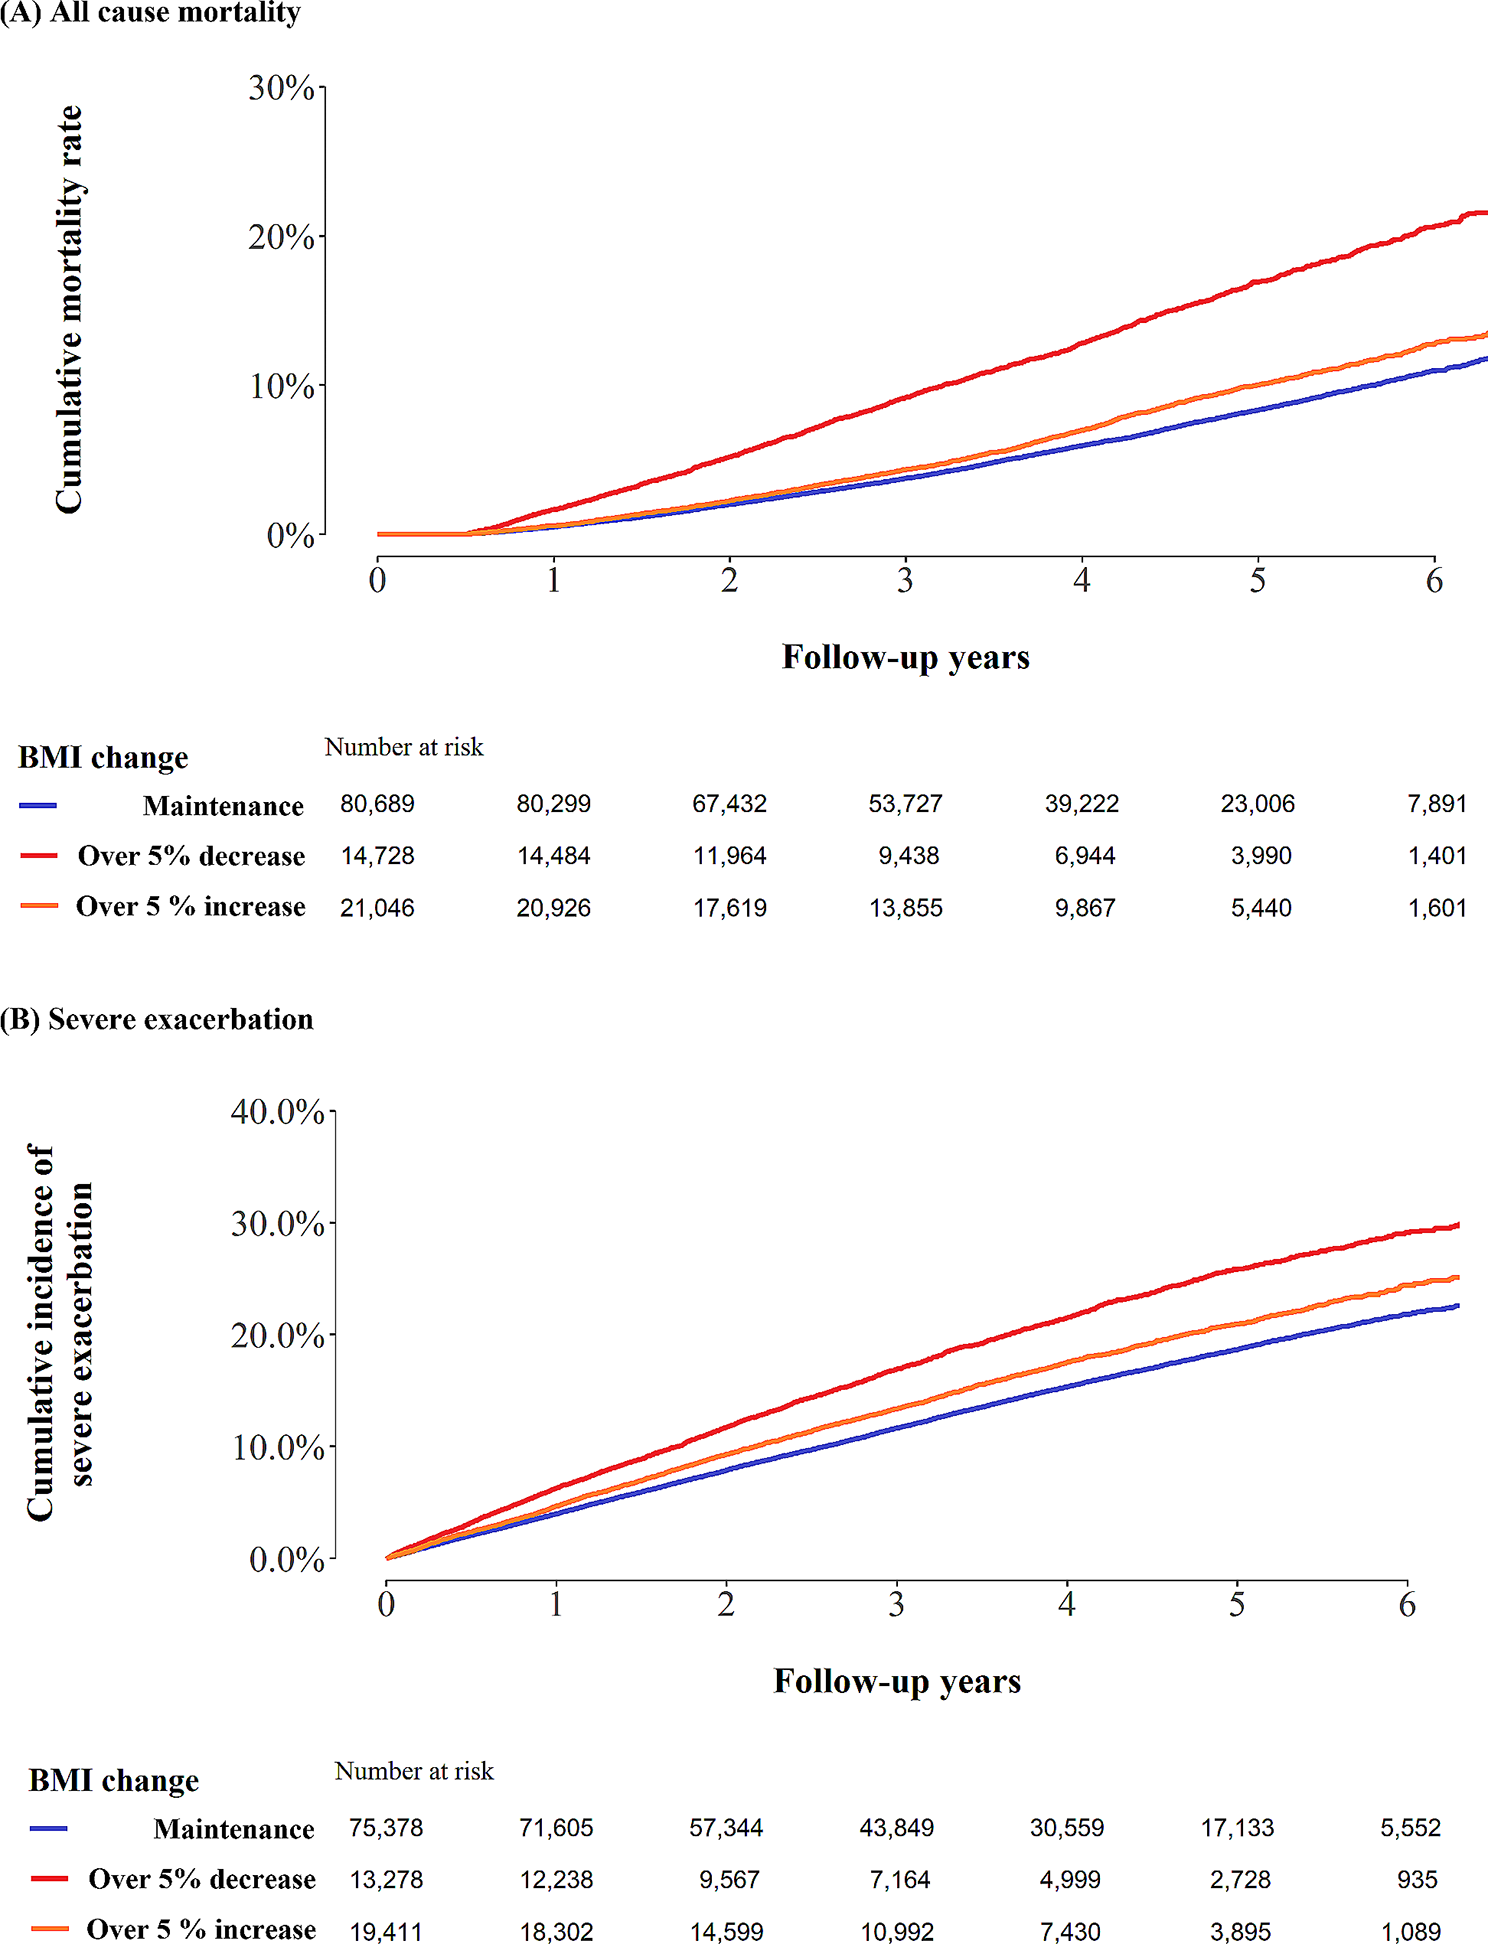 Longitudinal BMI change and outcomes in Chronic Obstructive Pulmonary Disease: a nationwide population-based cohort study